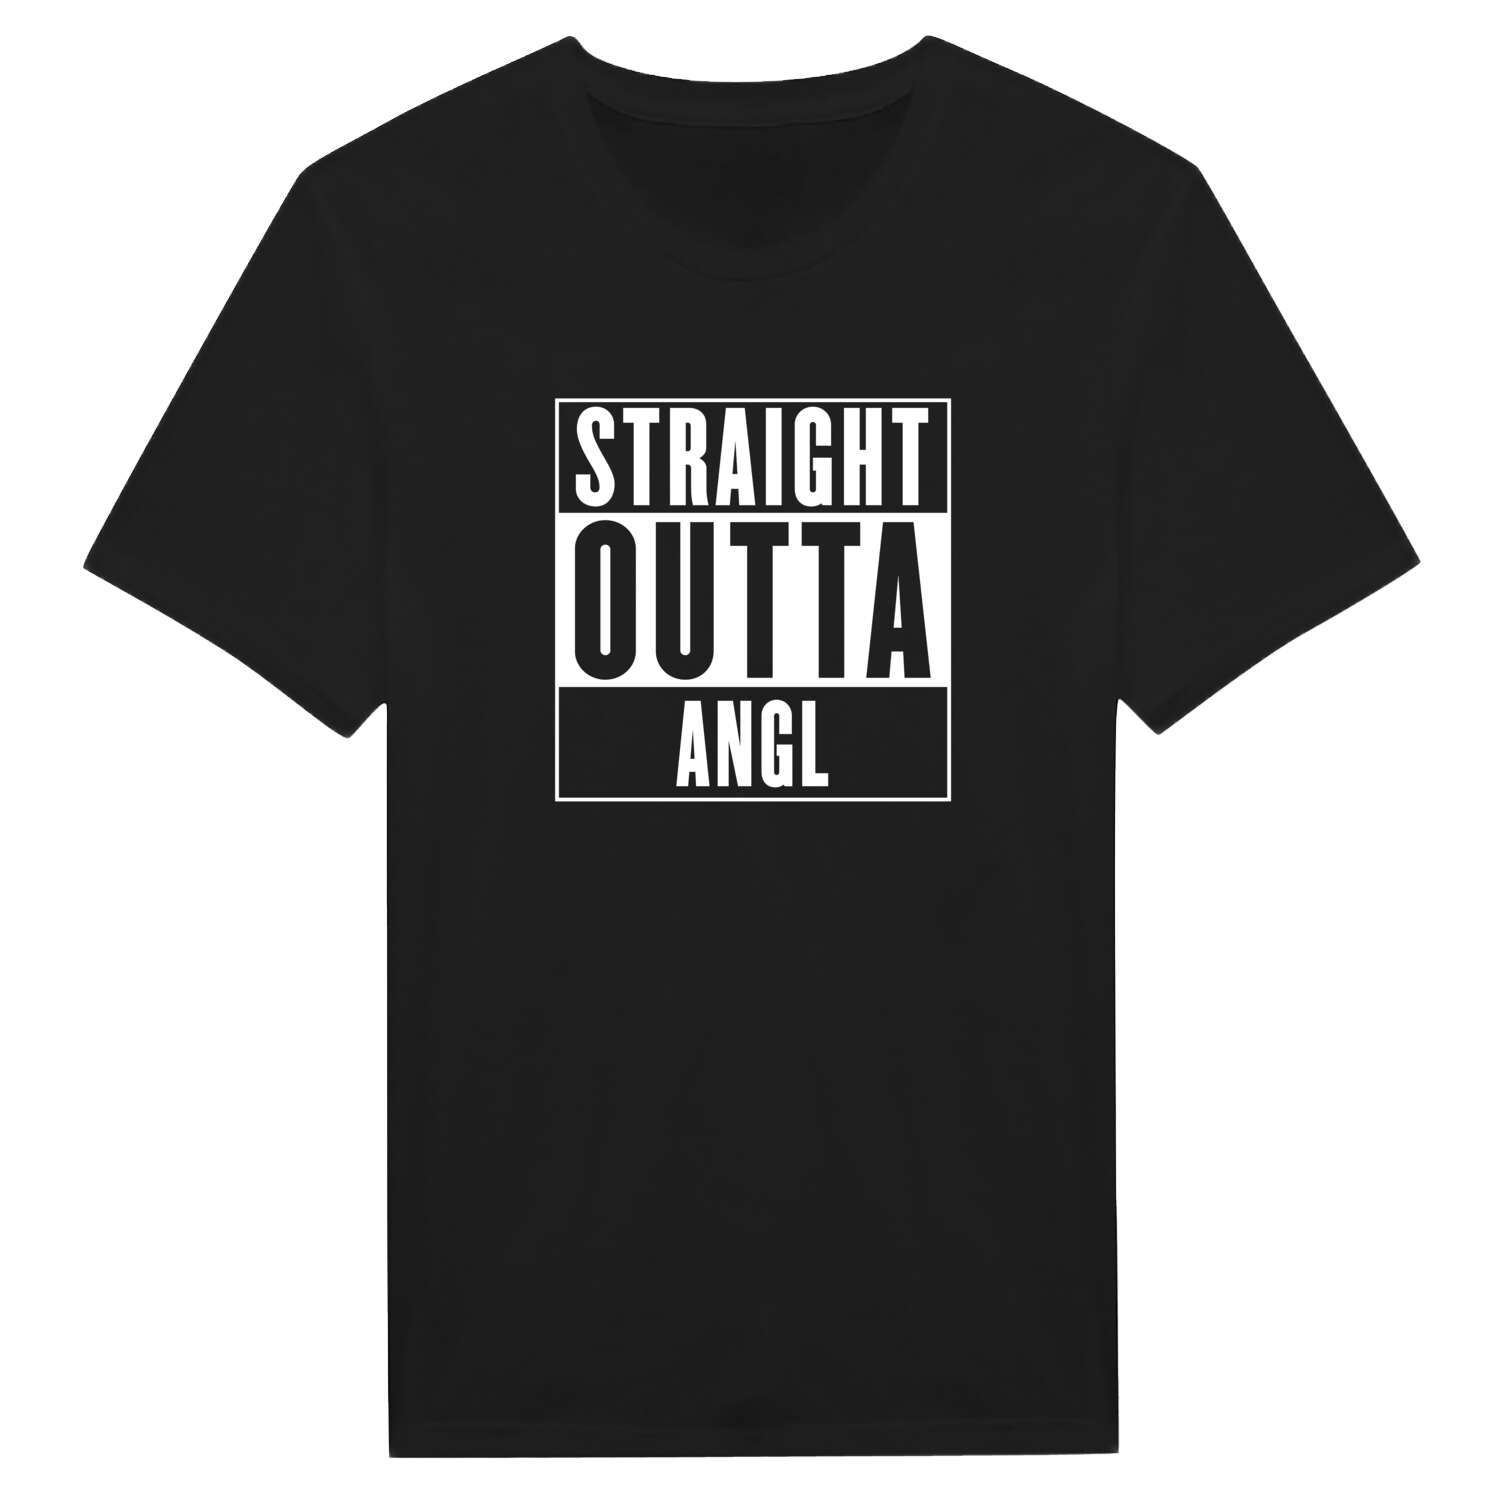 Angl T-Shirt »Straight Outta«